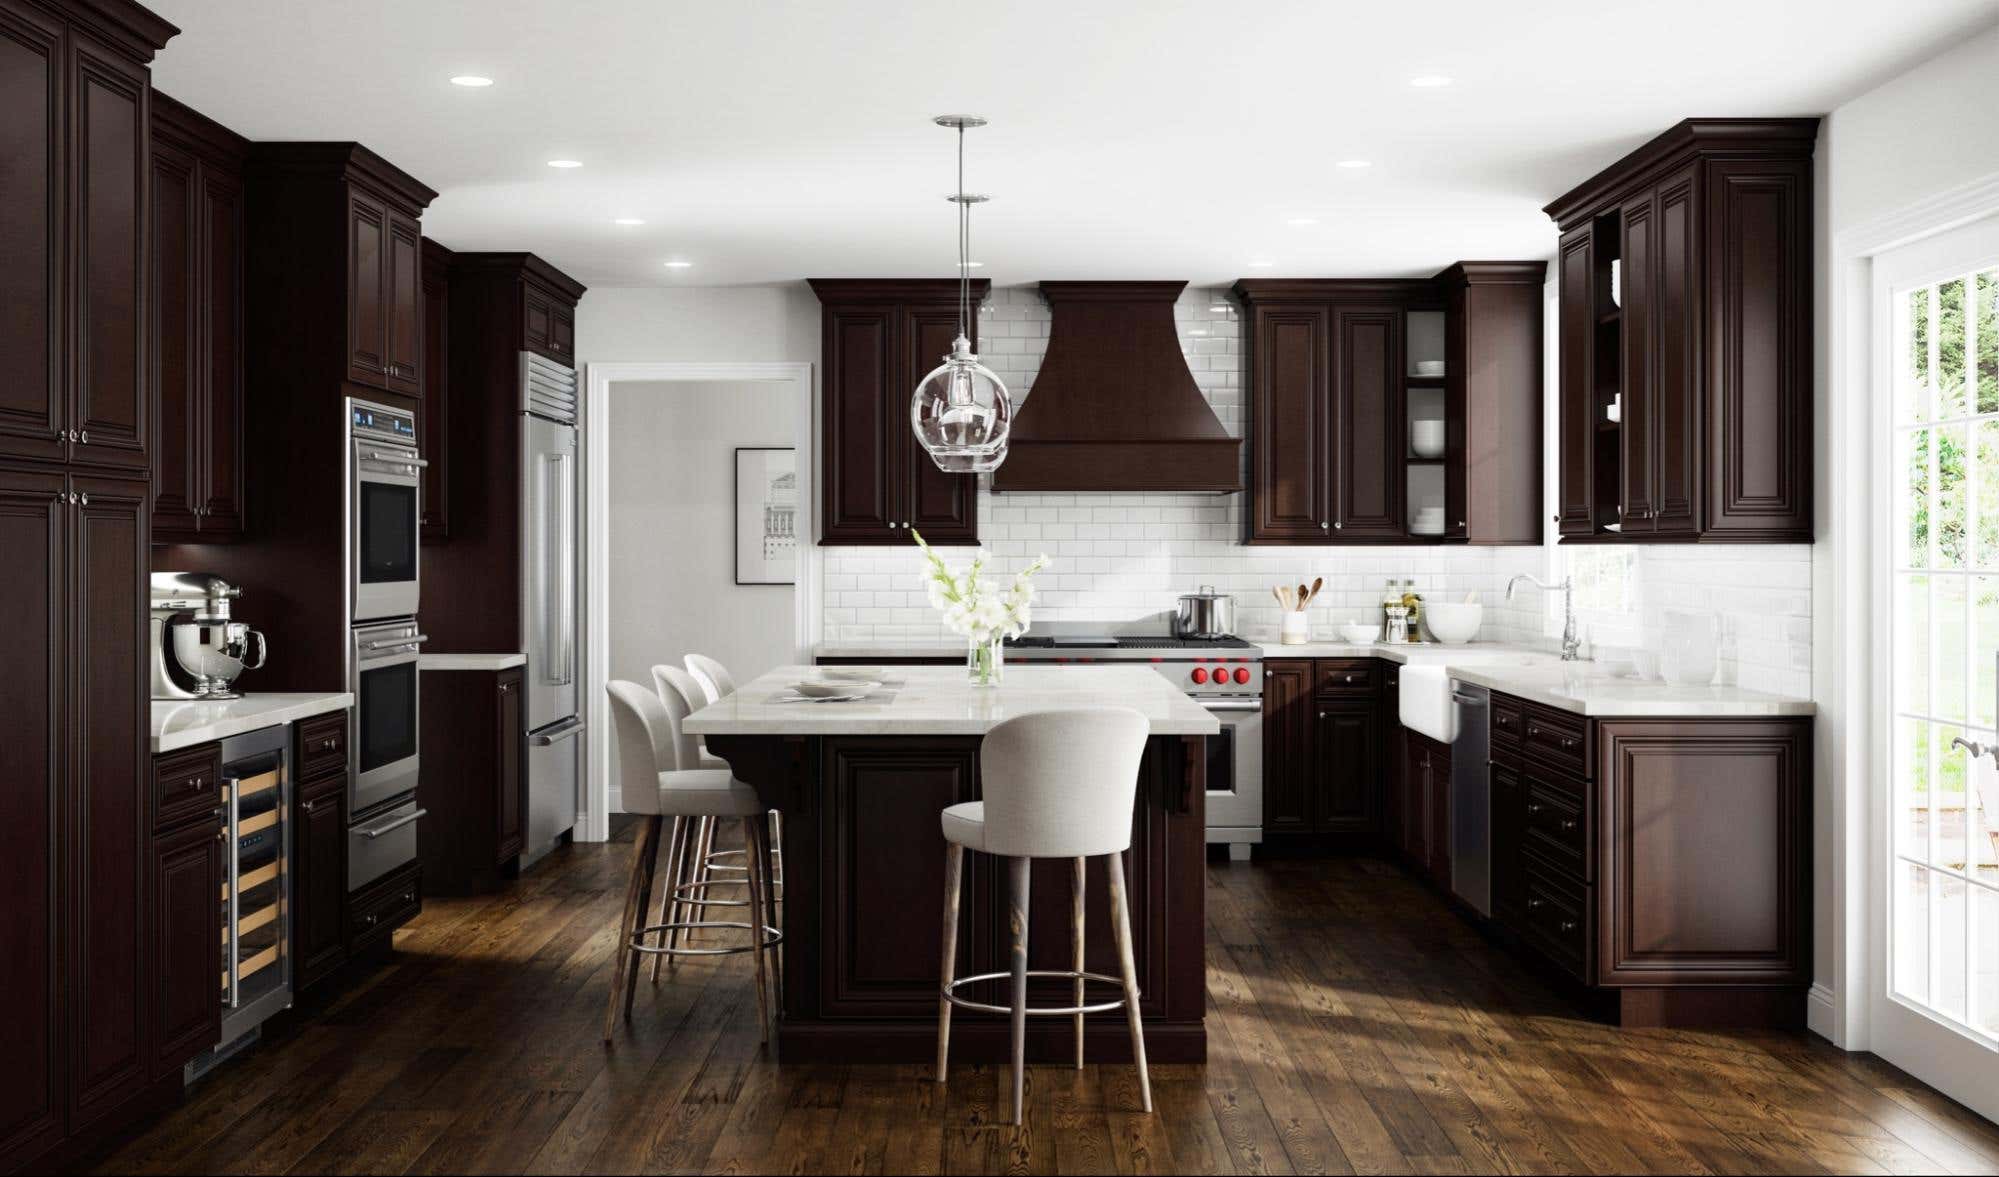 9 Ways to Update Your Kitchen Cabinets with 10-Foot Ceilings